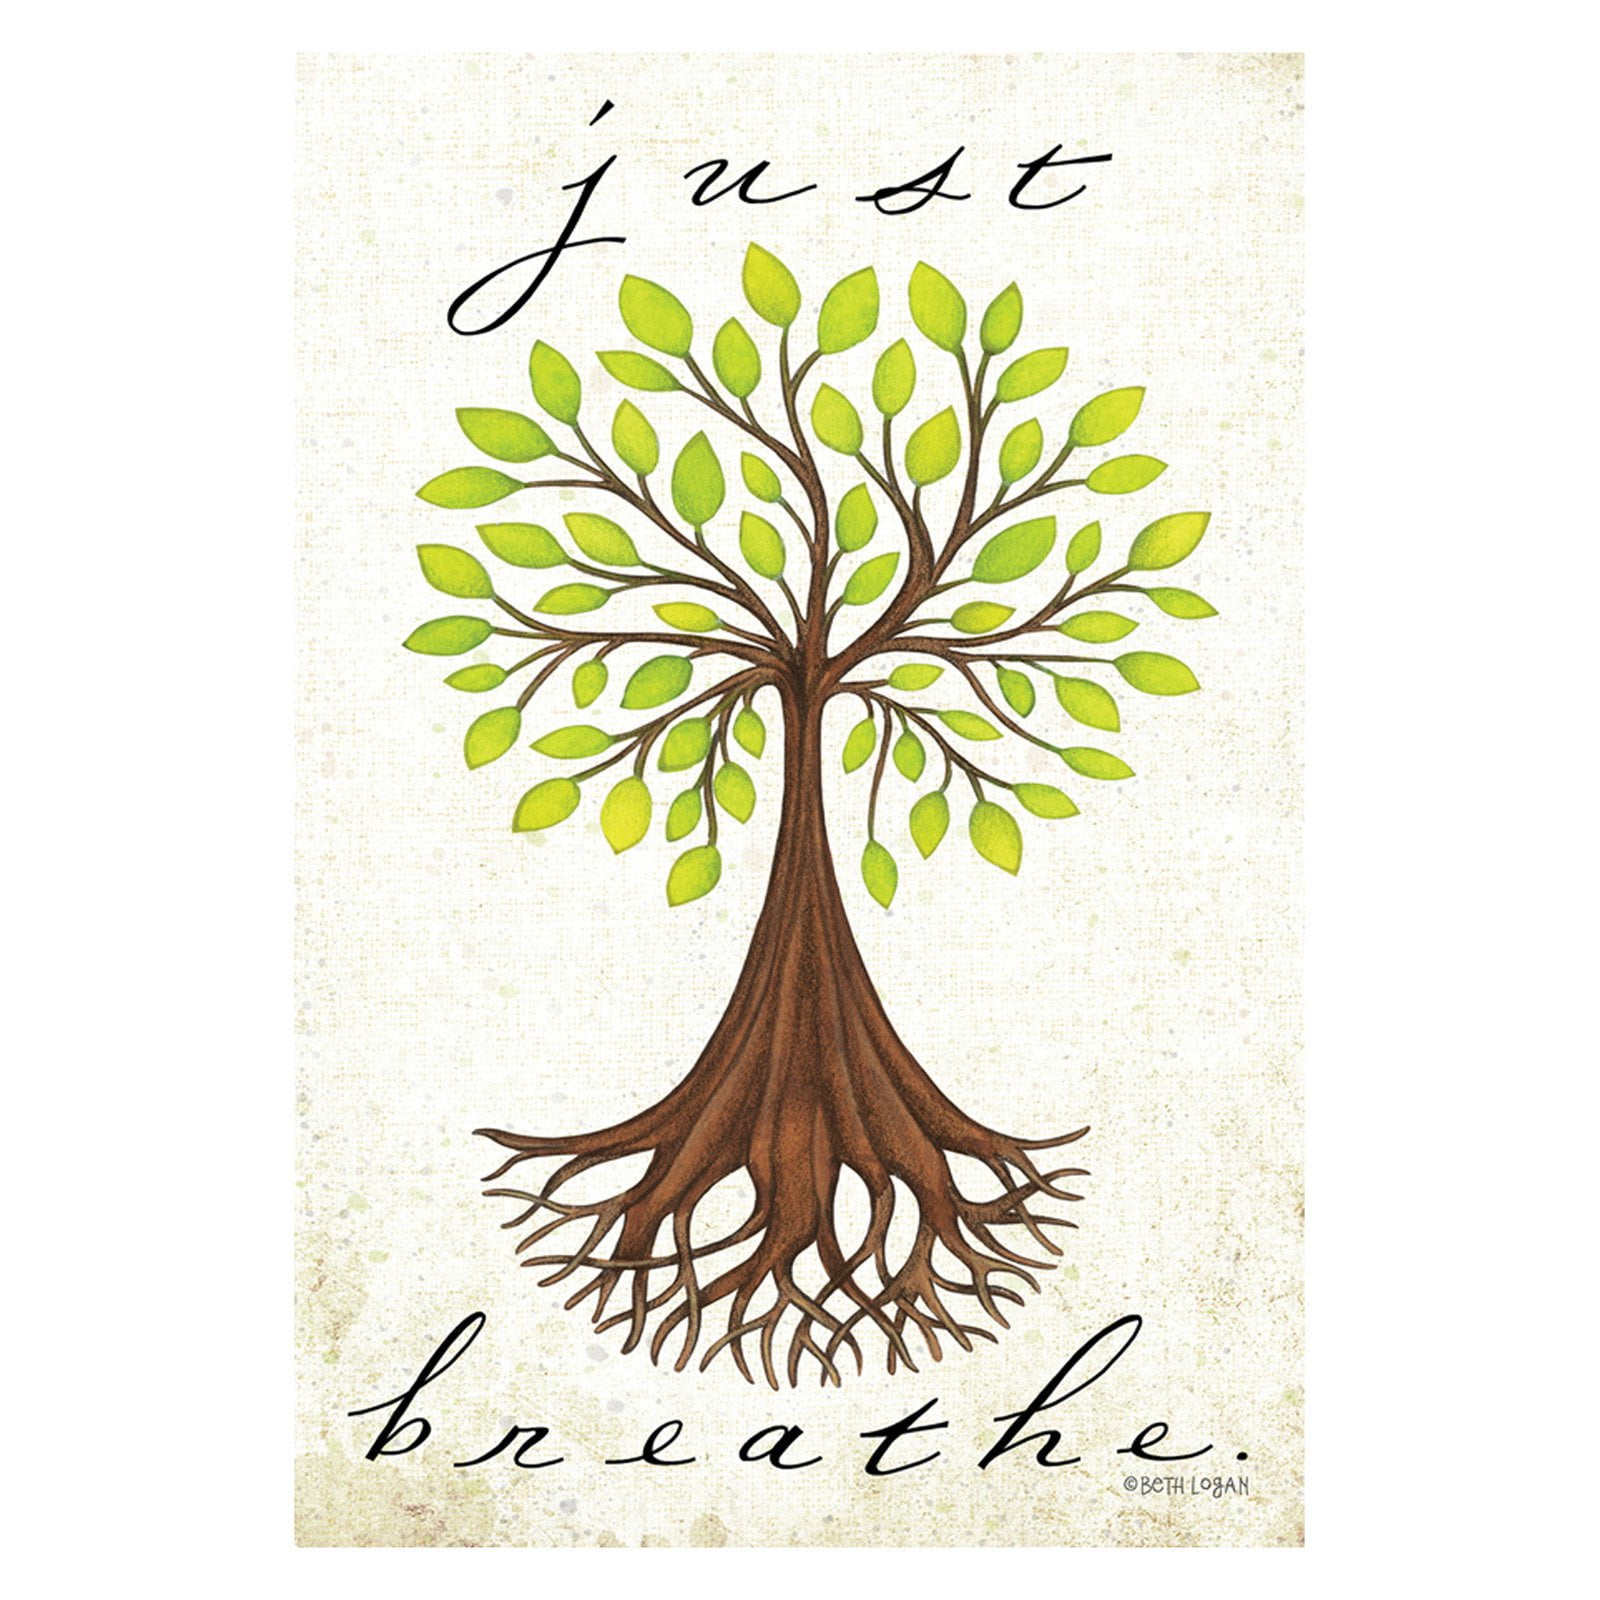 Toland Home Garden Just Breathe 12.5 x 18 Inch Decorative Inspirational Earth Tree Roots Garden Flag